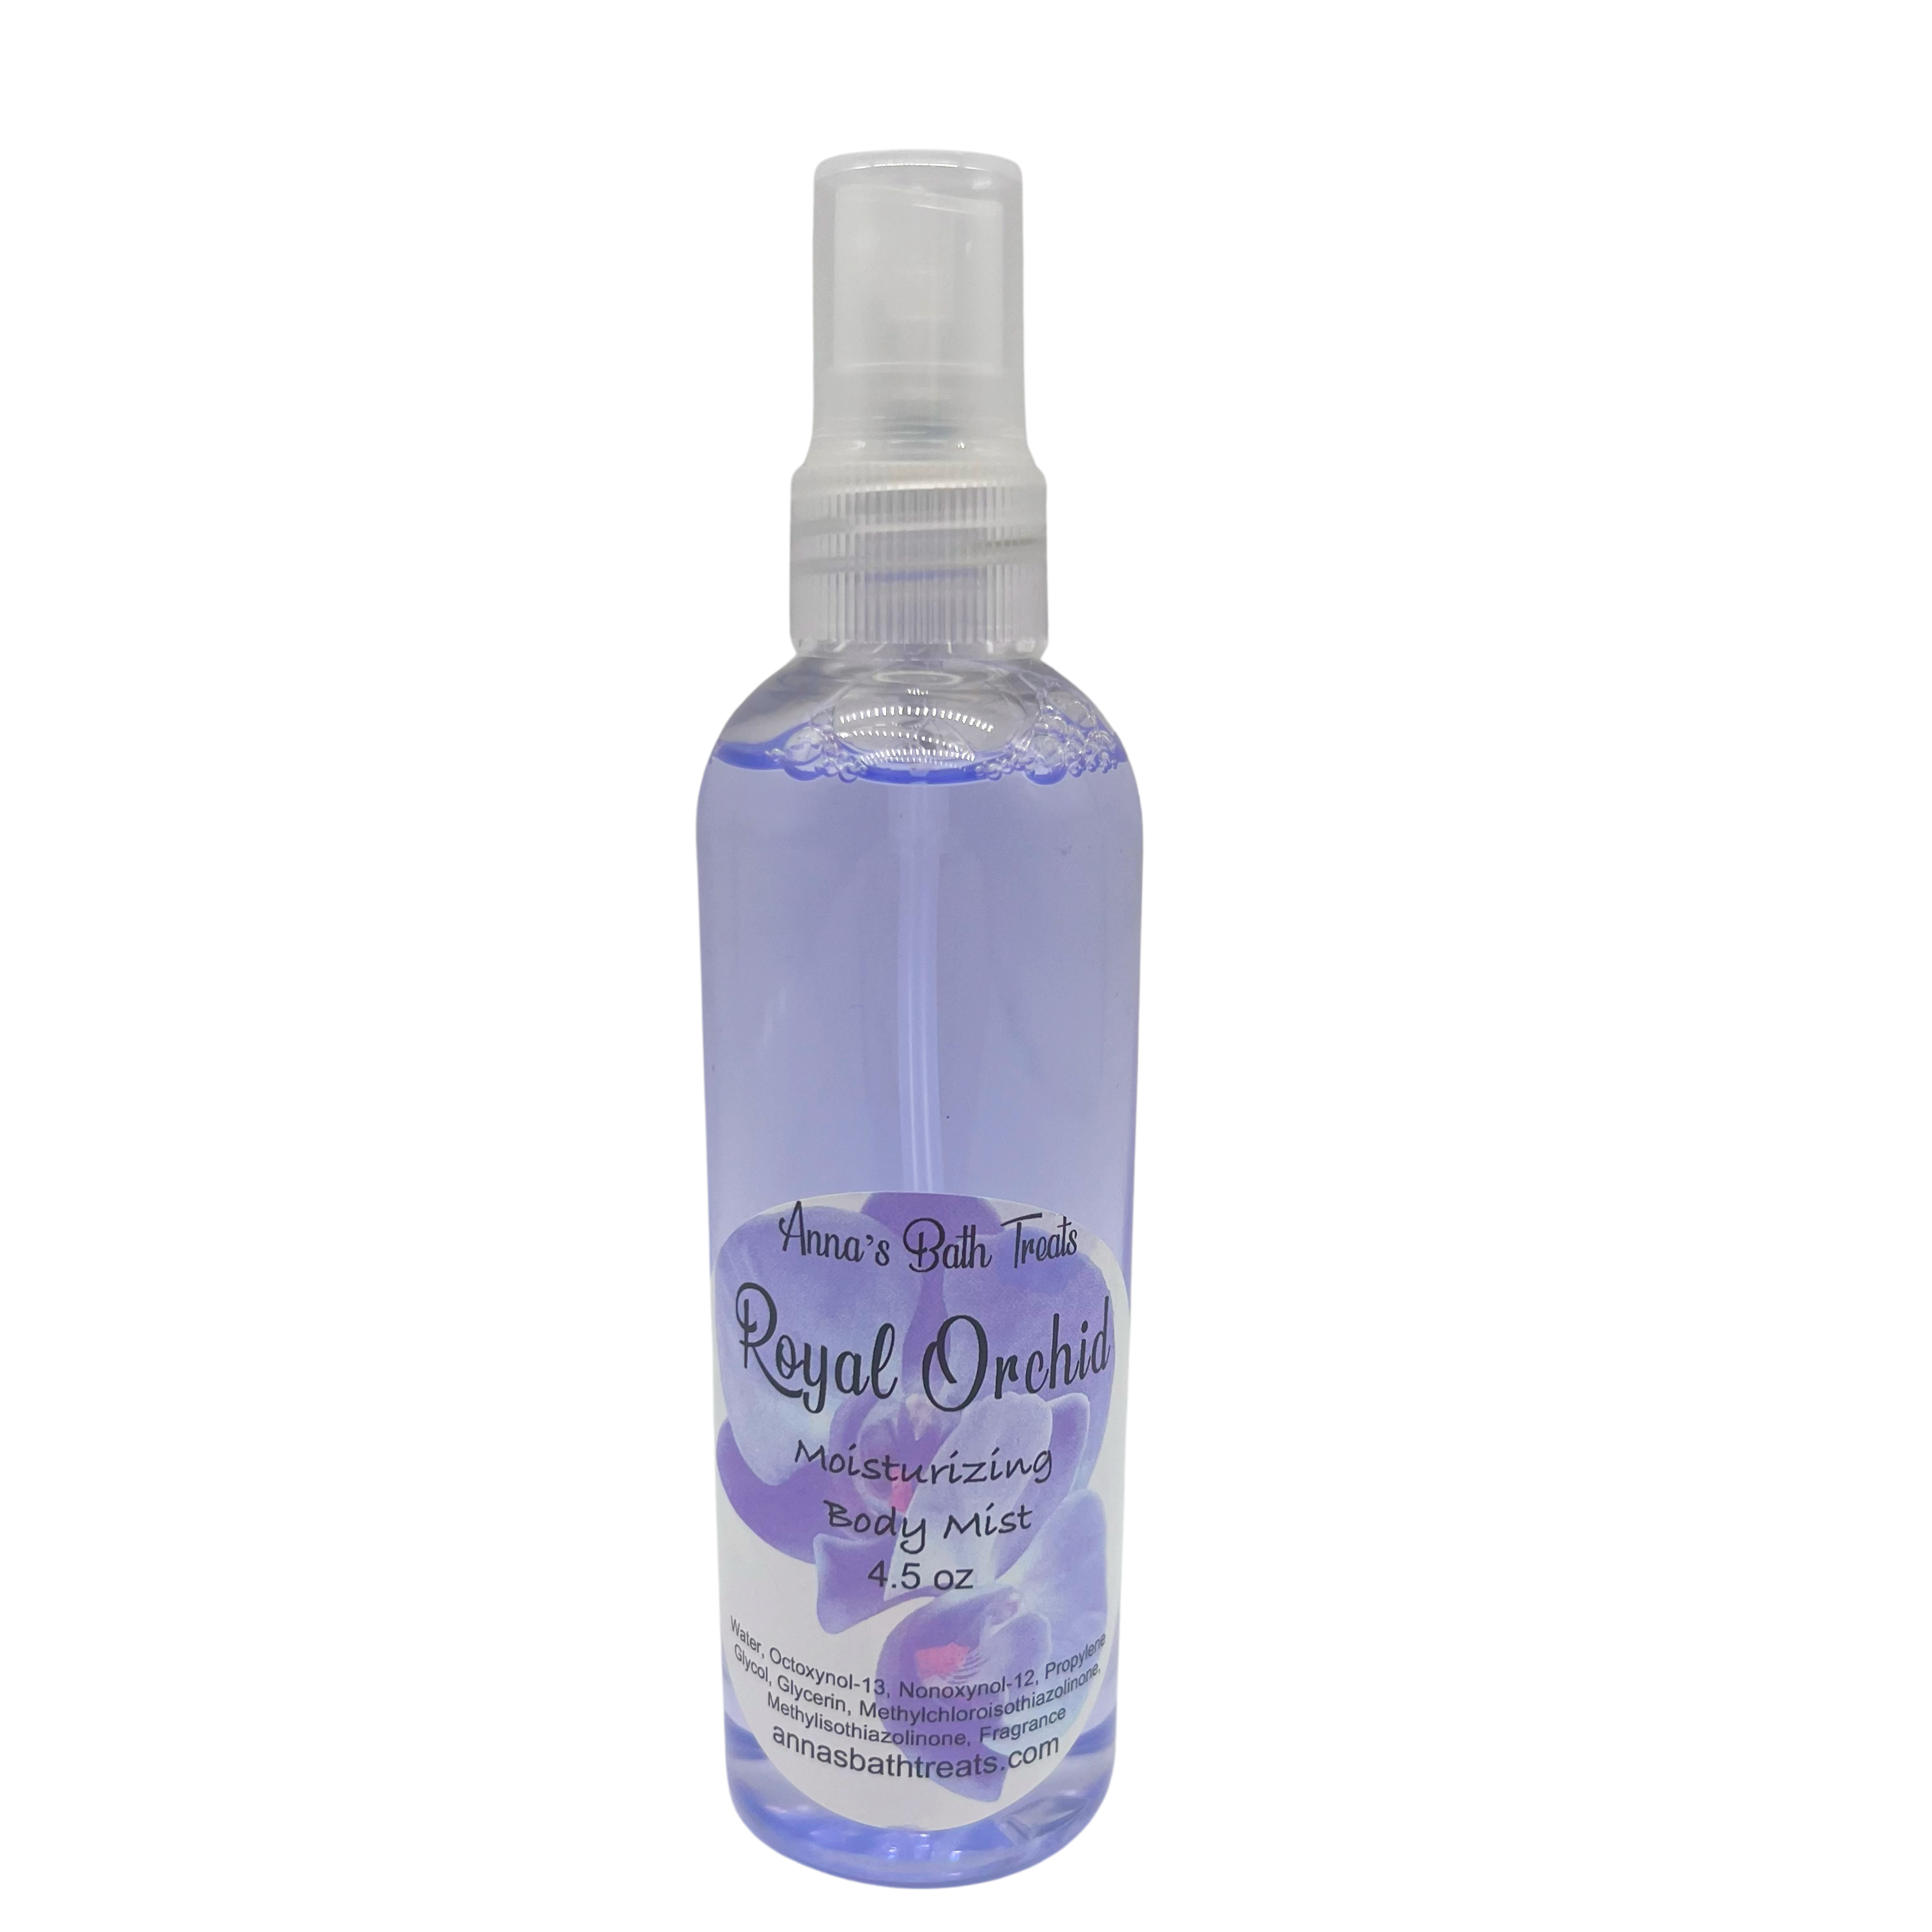 Royal Orchid Body Mist